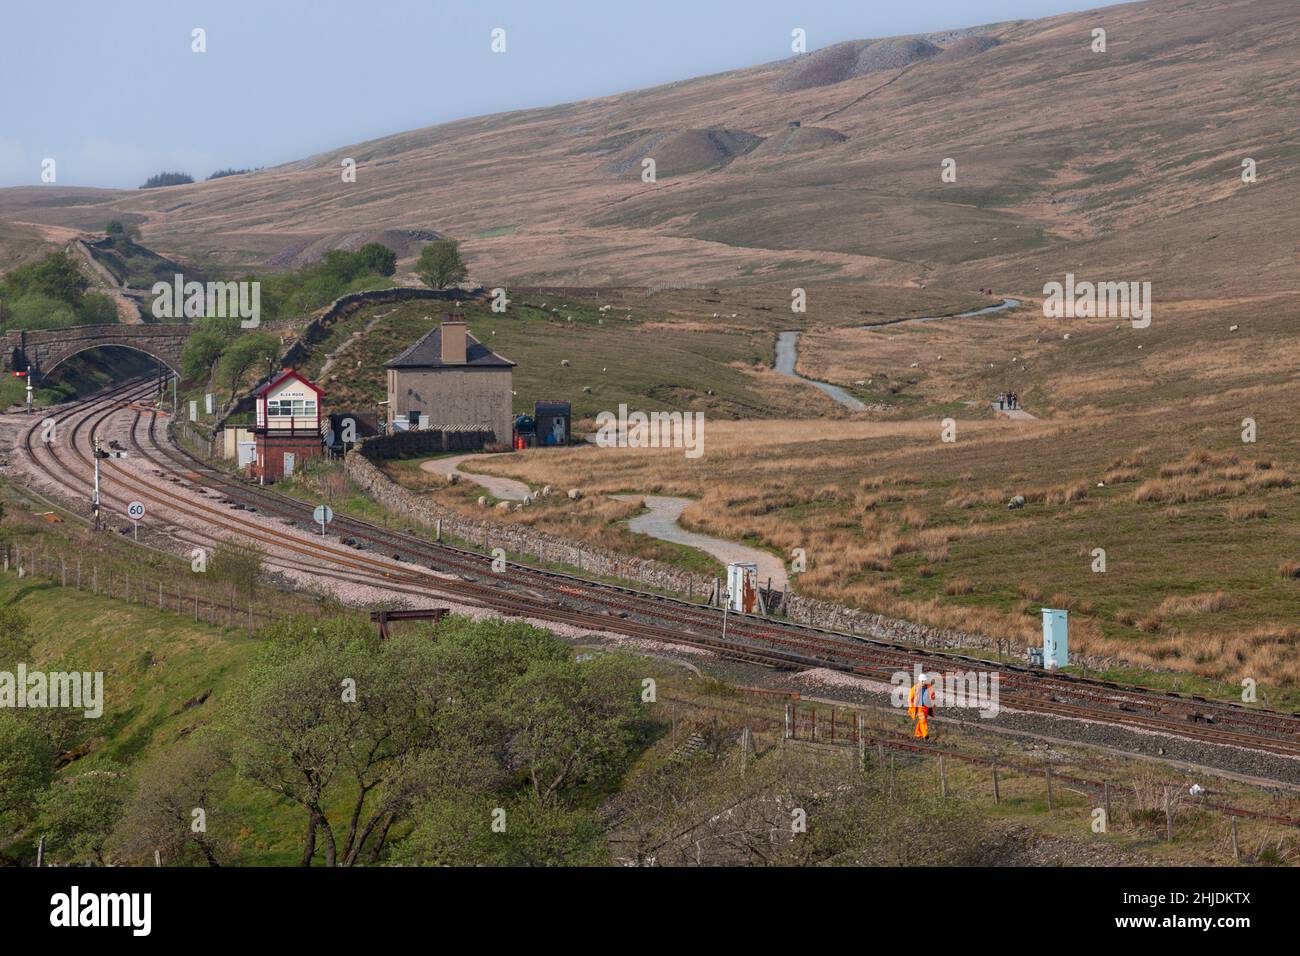 The signalman at Blea Moor signal box  (north of Ribblehead viaduct) sets off on the long walk back to civilization after the evening shift change. Stock Photo